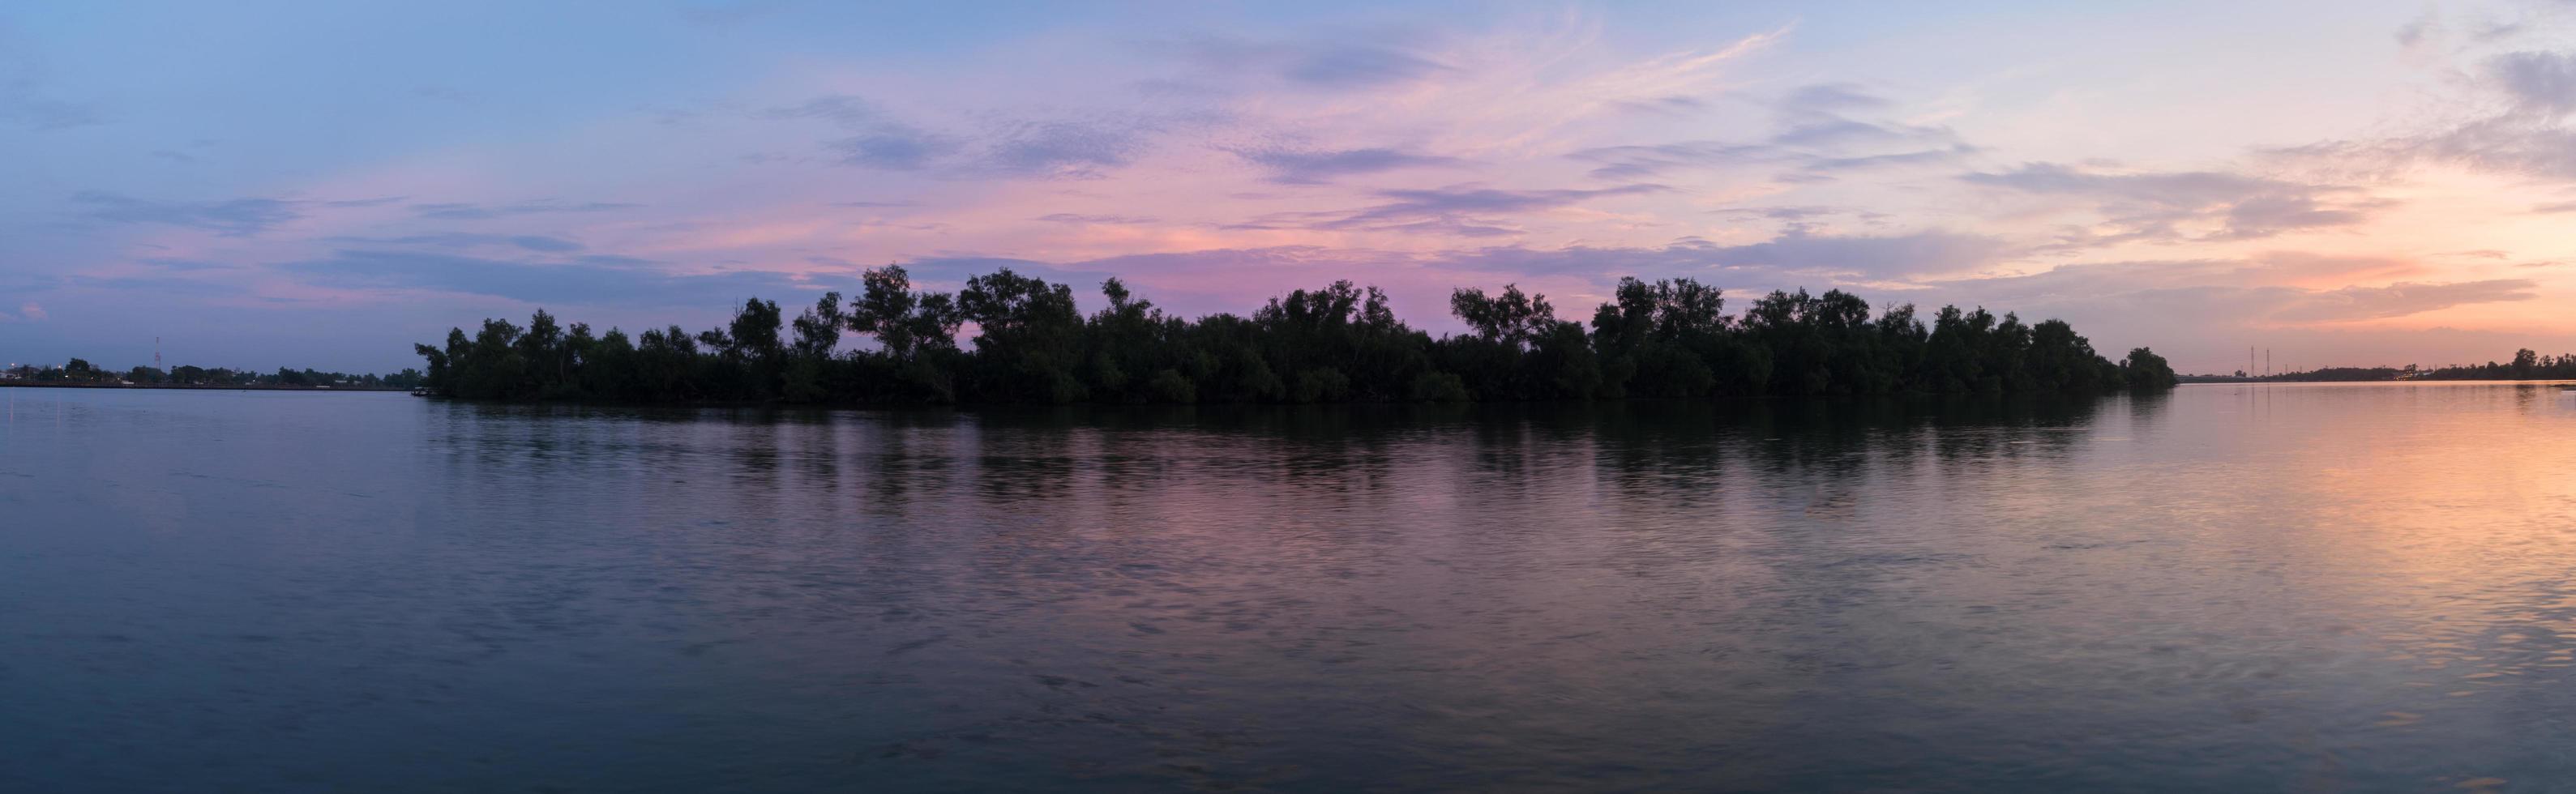 Sunset at the river photo